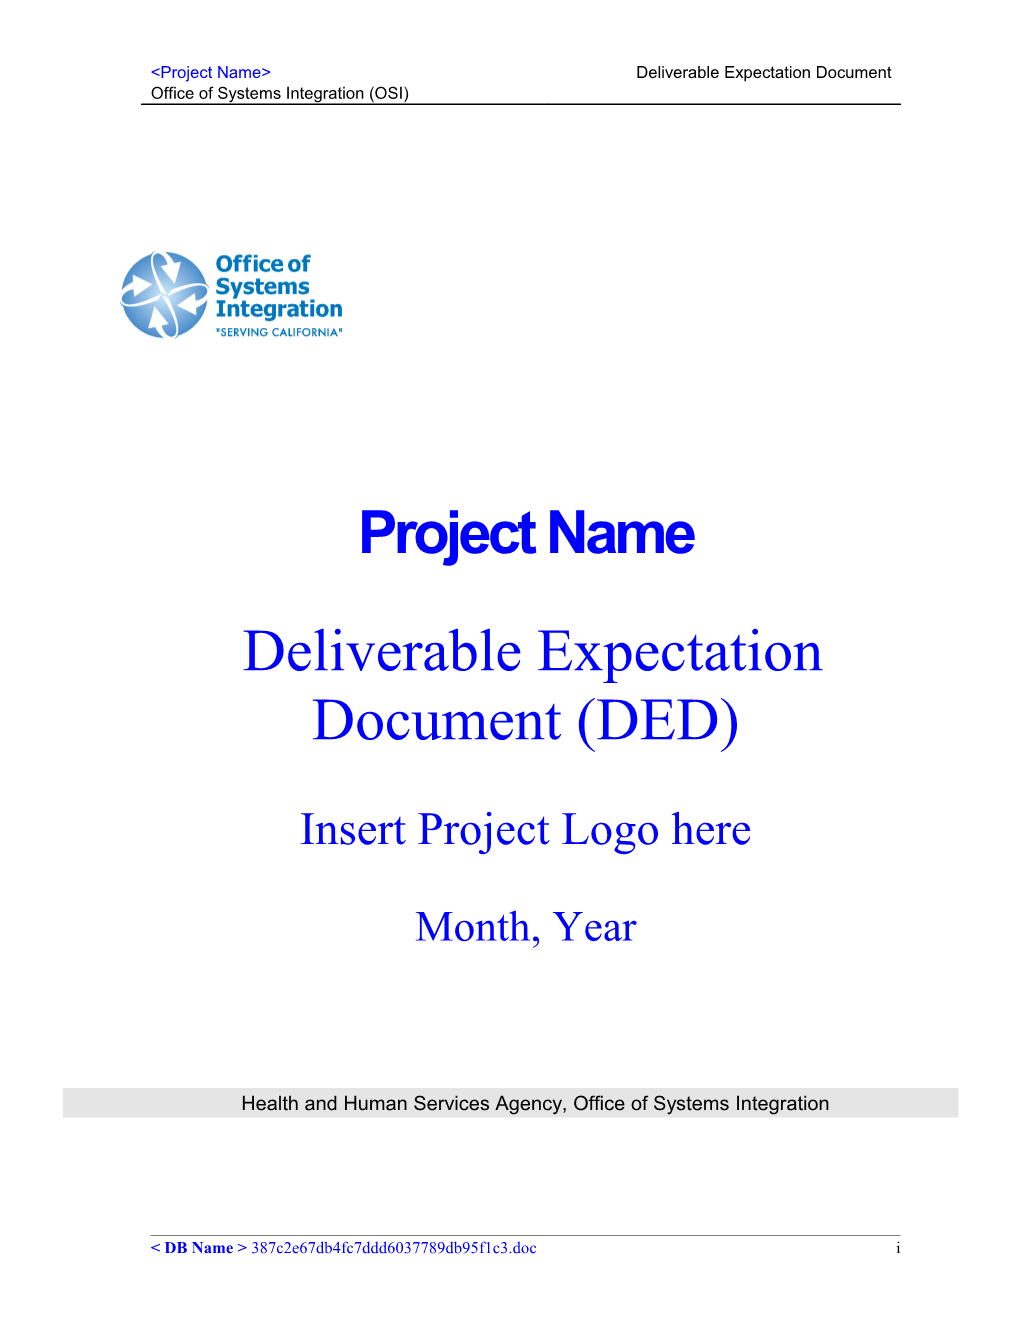 Deliverable Expectation Document (DED)